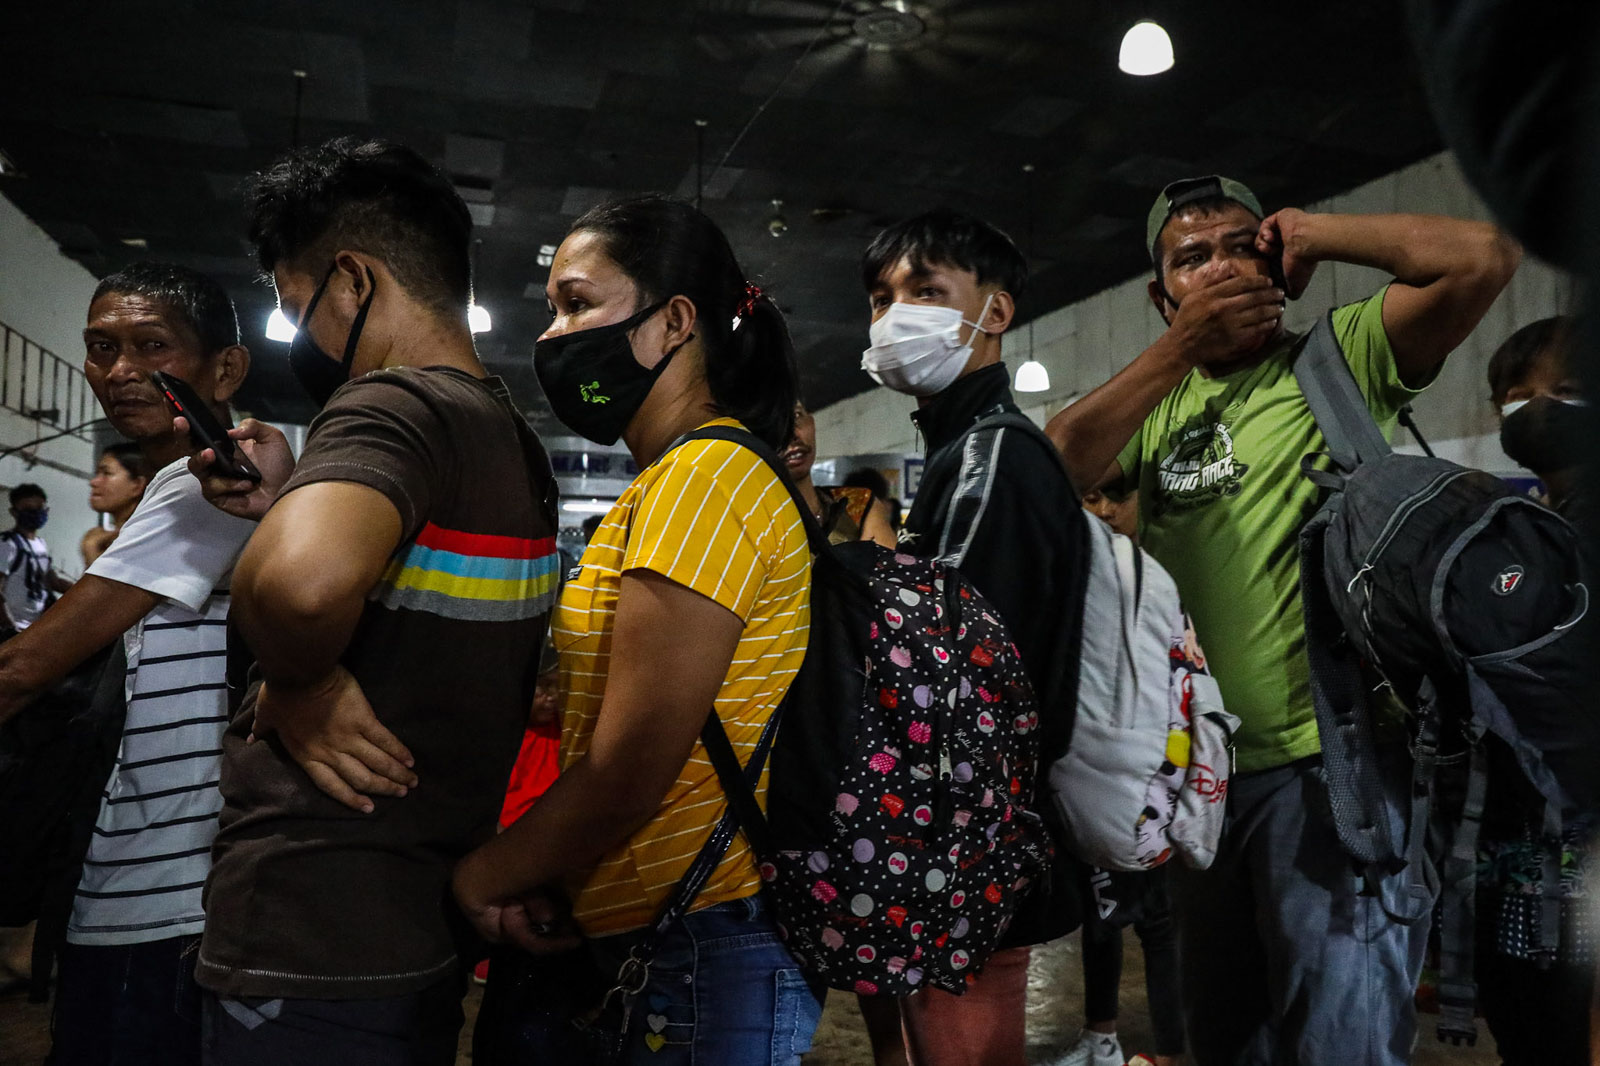 TRACING PATIENTS. Thousands of commuters crowd the Araneta Center Bus Terminal in Quezon City on March 13, 2020, in a frantic rush to leave Manila to avoid the travel ban ahead of the lockdown. Photo by Jire Carreon/Rappler 